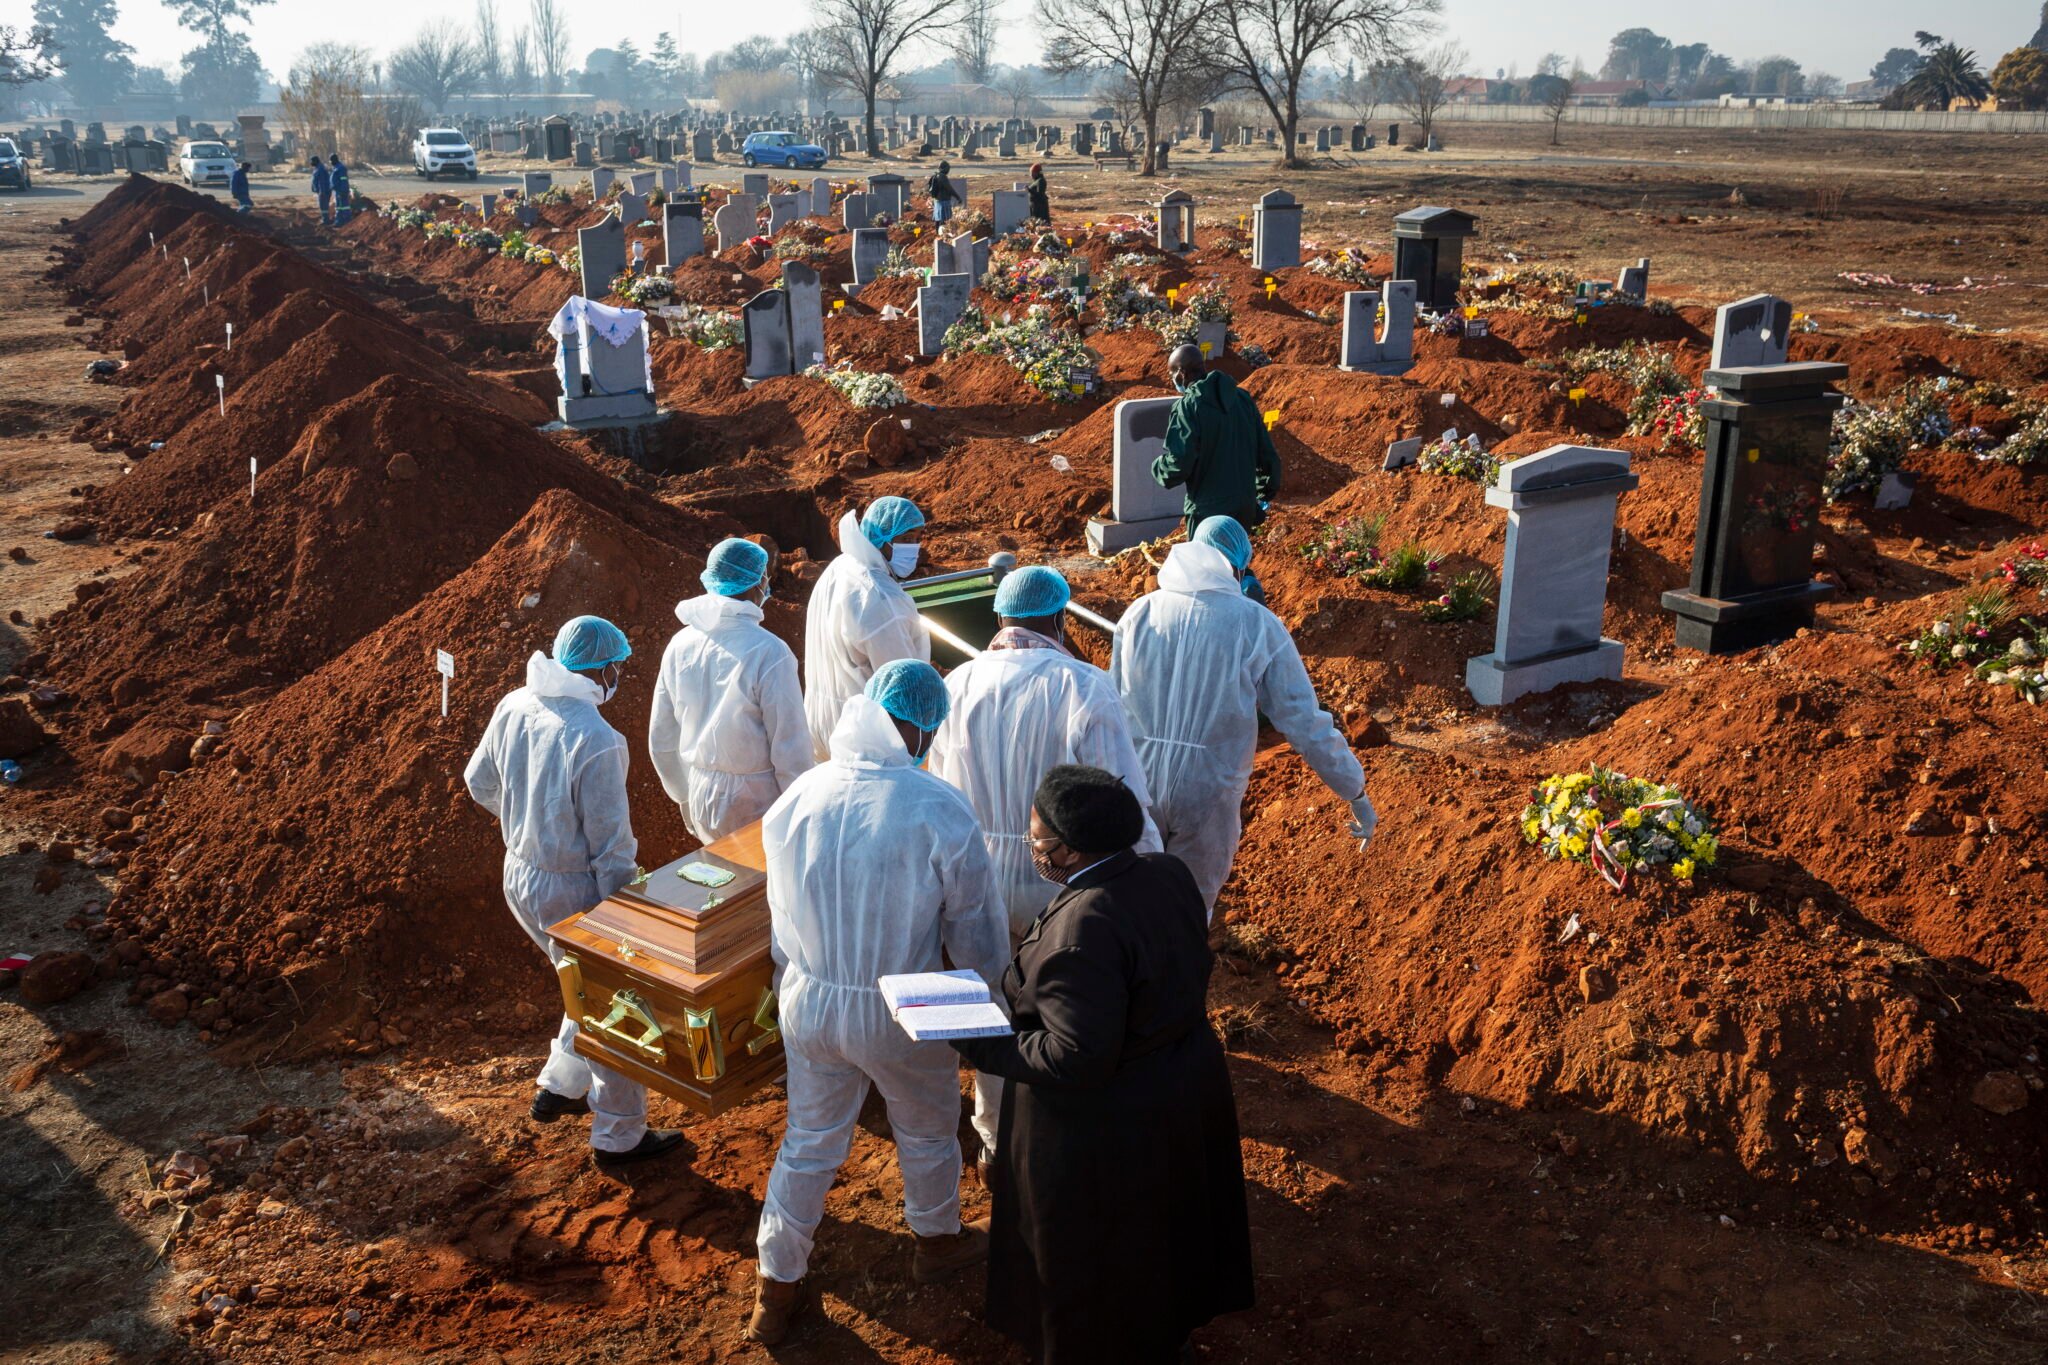 epa08667919 The coffin of a victim of the Covid-19 Corona virus being taken to her grave by relatives at a burial ground in Johannesburg, South Africa, 24 July 2020 (reissued on 14 September 2020). The National Funeral Practitioners Association of SA (Nafupa) have threatened a 3-day strike starting on 14 September after the government tightened legislation regarding undertakers working conditions. The strike would mean bodies of deceased would not be collected from old age homes, hospitals and morgues for three days, that might lead to possible heath issues.  EPA/KIM LUDBROOK 
Dostawca: PAP/EPA.